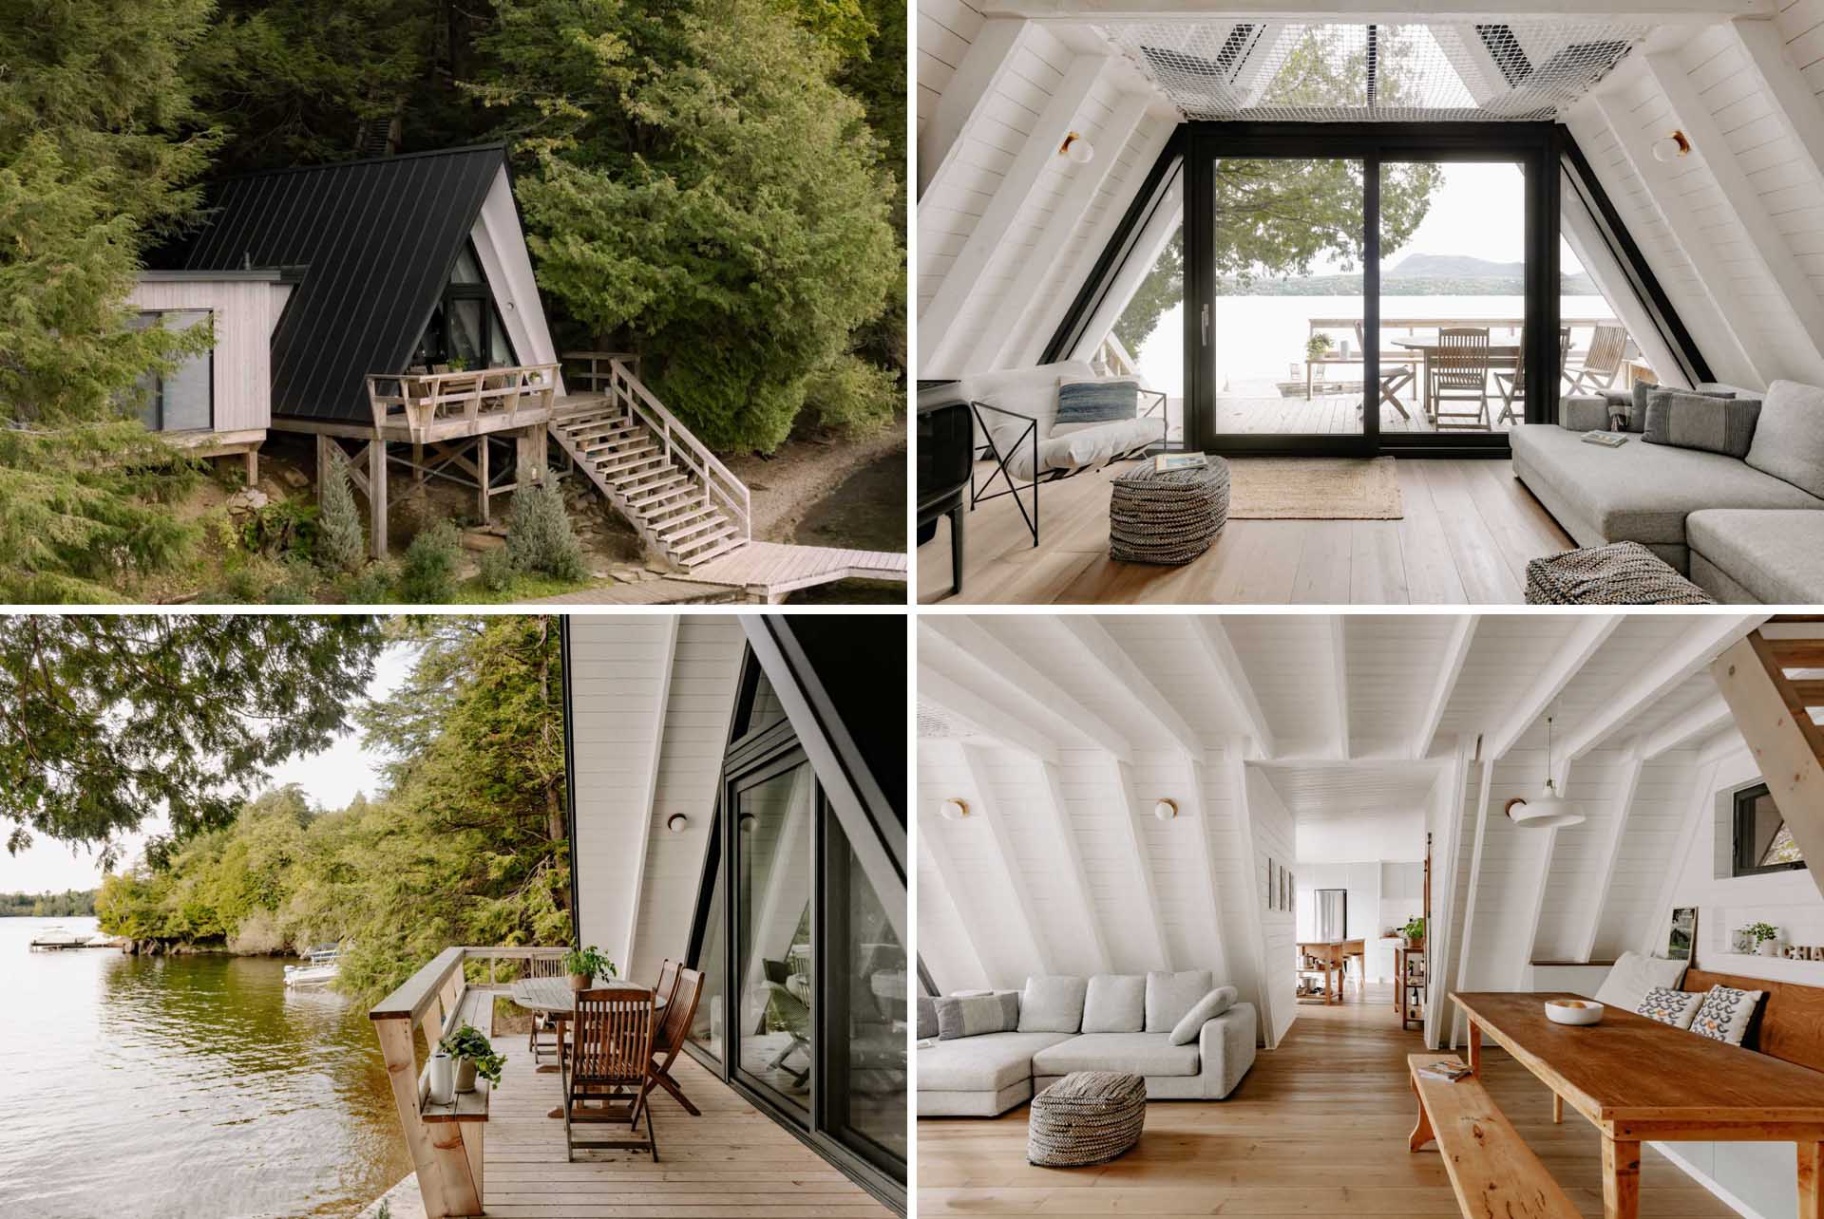 a frame cabin interior design Bulan 2 This Secluded A-Frame Cabin Was Given A Contemporary Design Update